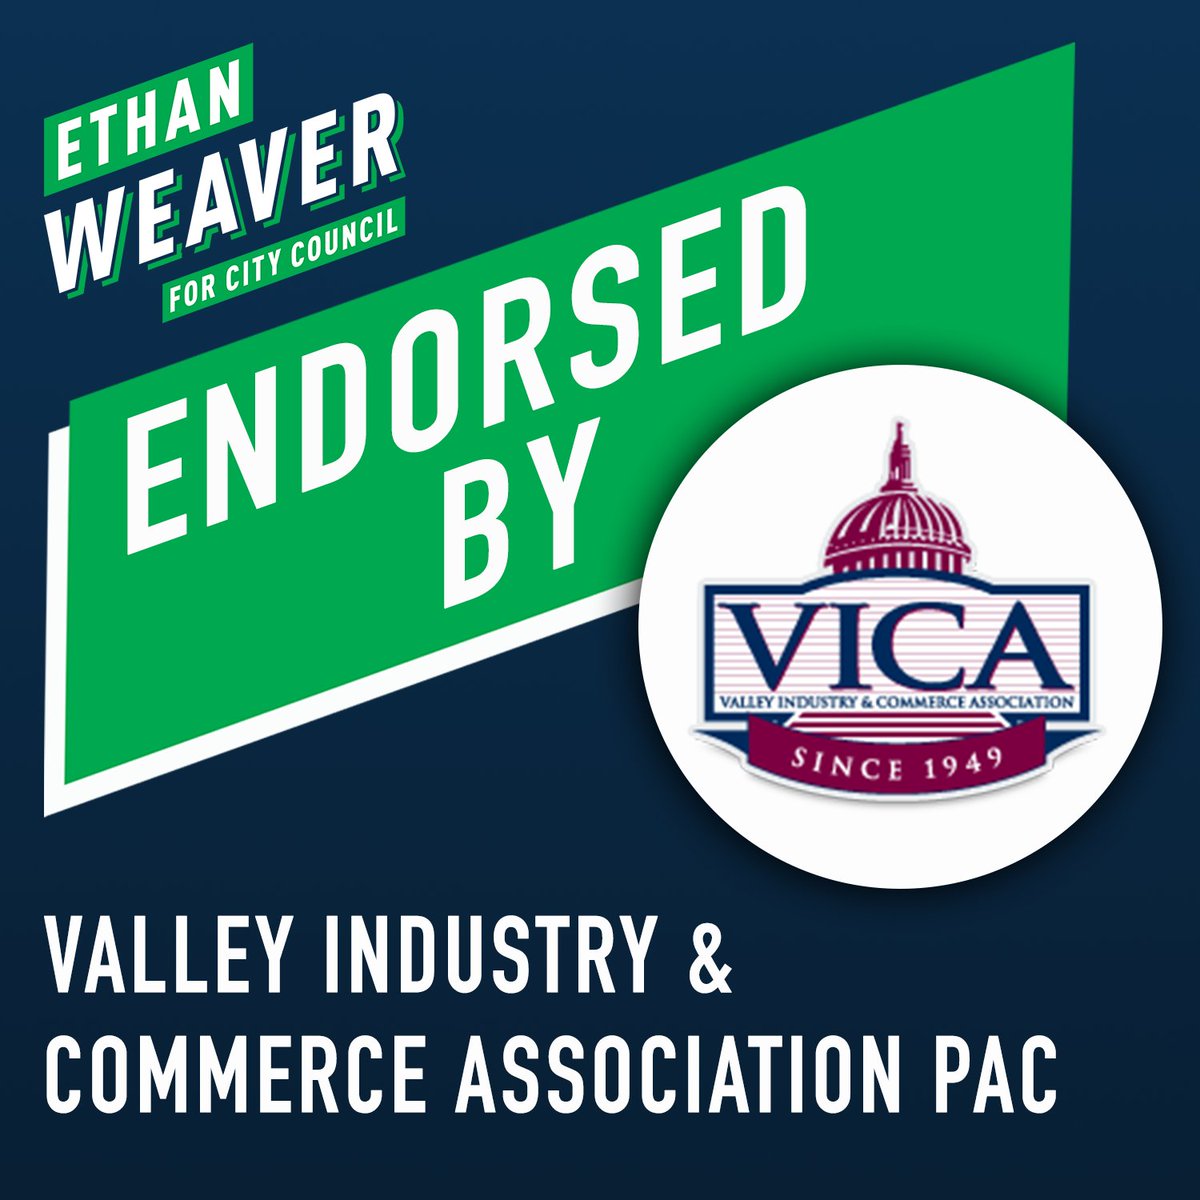 Small businesses are essential to the fabric of Los Angeles — bringing vibrancy, opportunity, and good jobs to our neighborhoods. I'm honored to have the endorsement of @VICASFValley PAC. Together, we'll ensure small businesses have the resources & support they need to thrive.